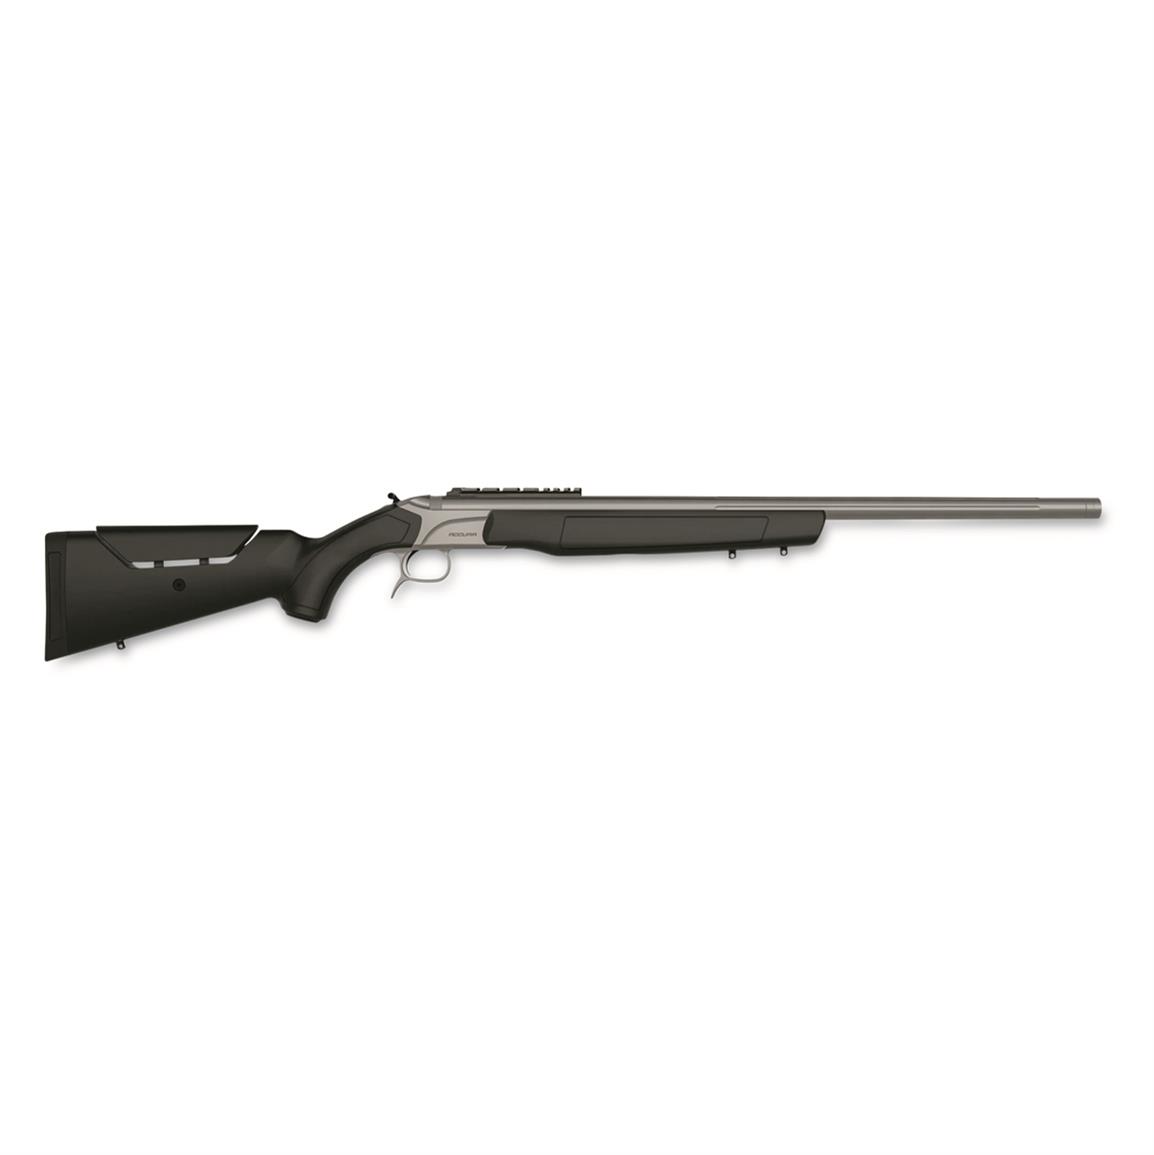 CVA Accura MR-X Muzzleloader, .50 Cal., 26" Stainless Barrel, Black Synthetic Stock